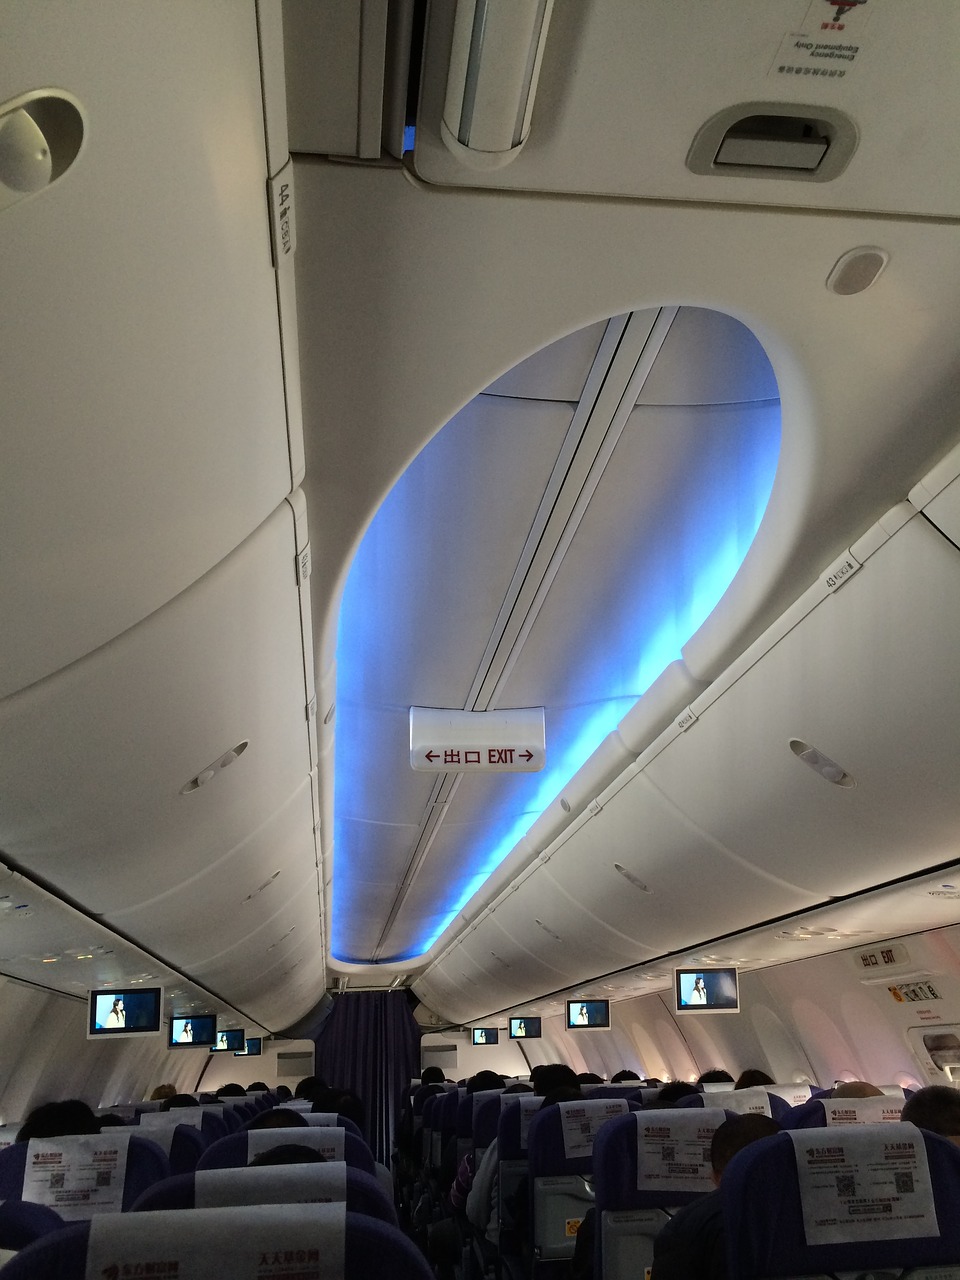 boeing 737 aircraft interior airline free photo